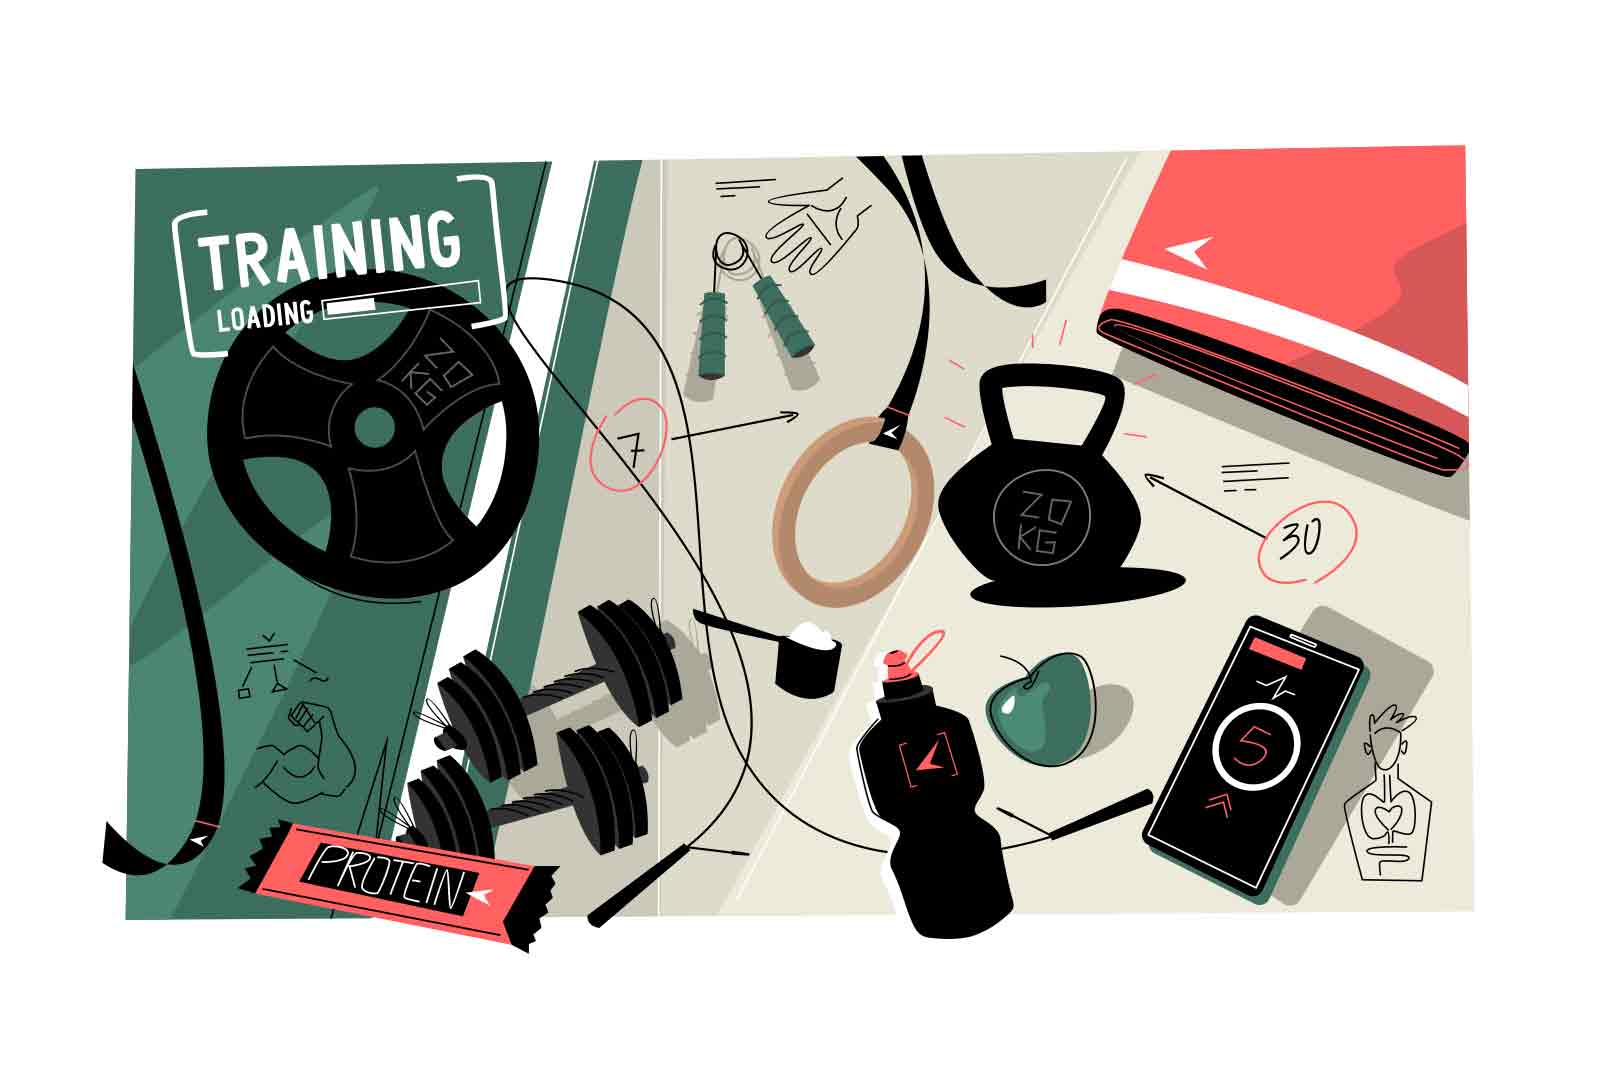 Sports equipment for traning in gym laying on floor vector illustration. 